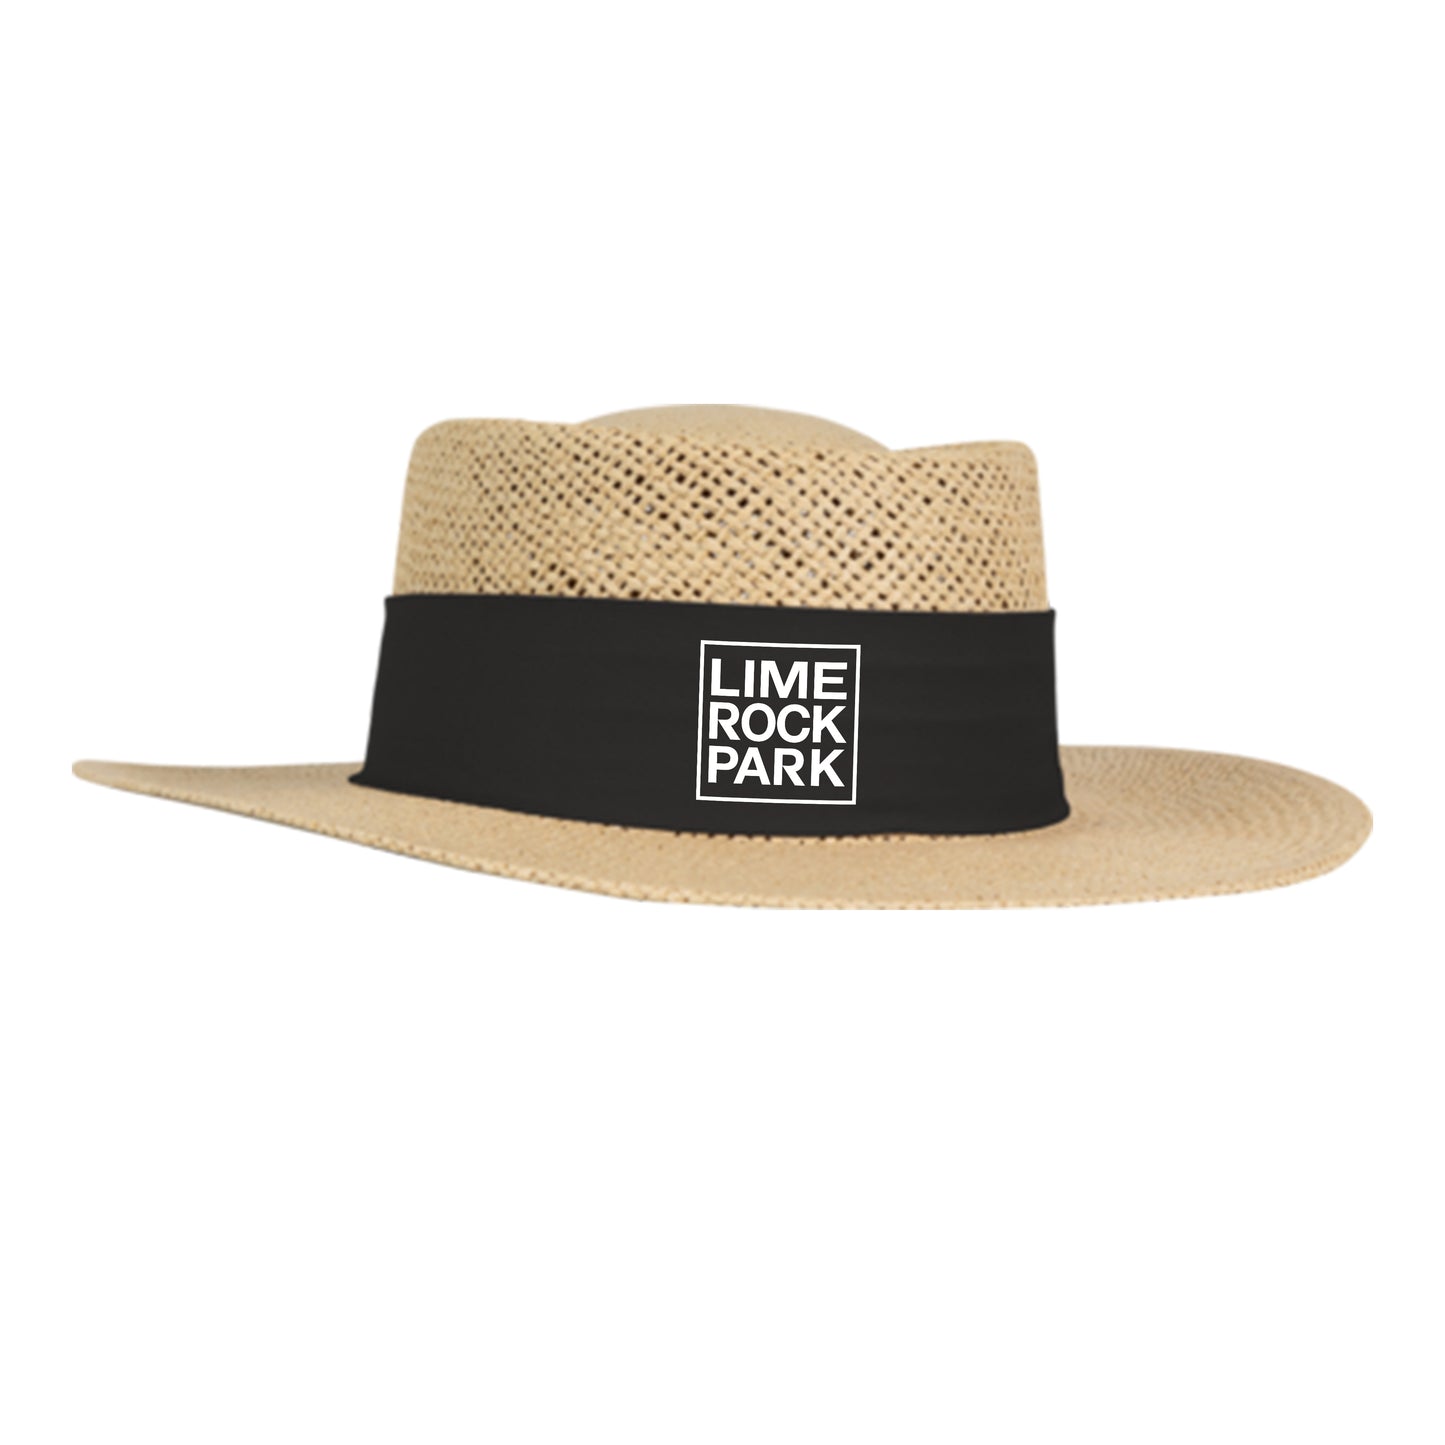 Lime Rock Park Straw Hat with Black Cloth Band